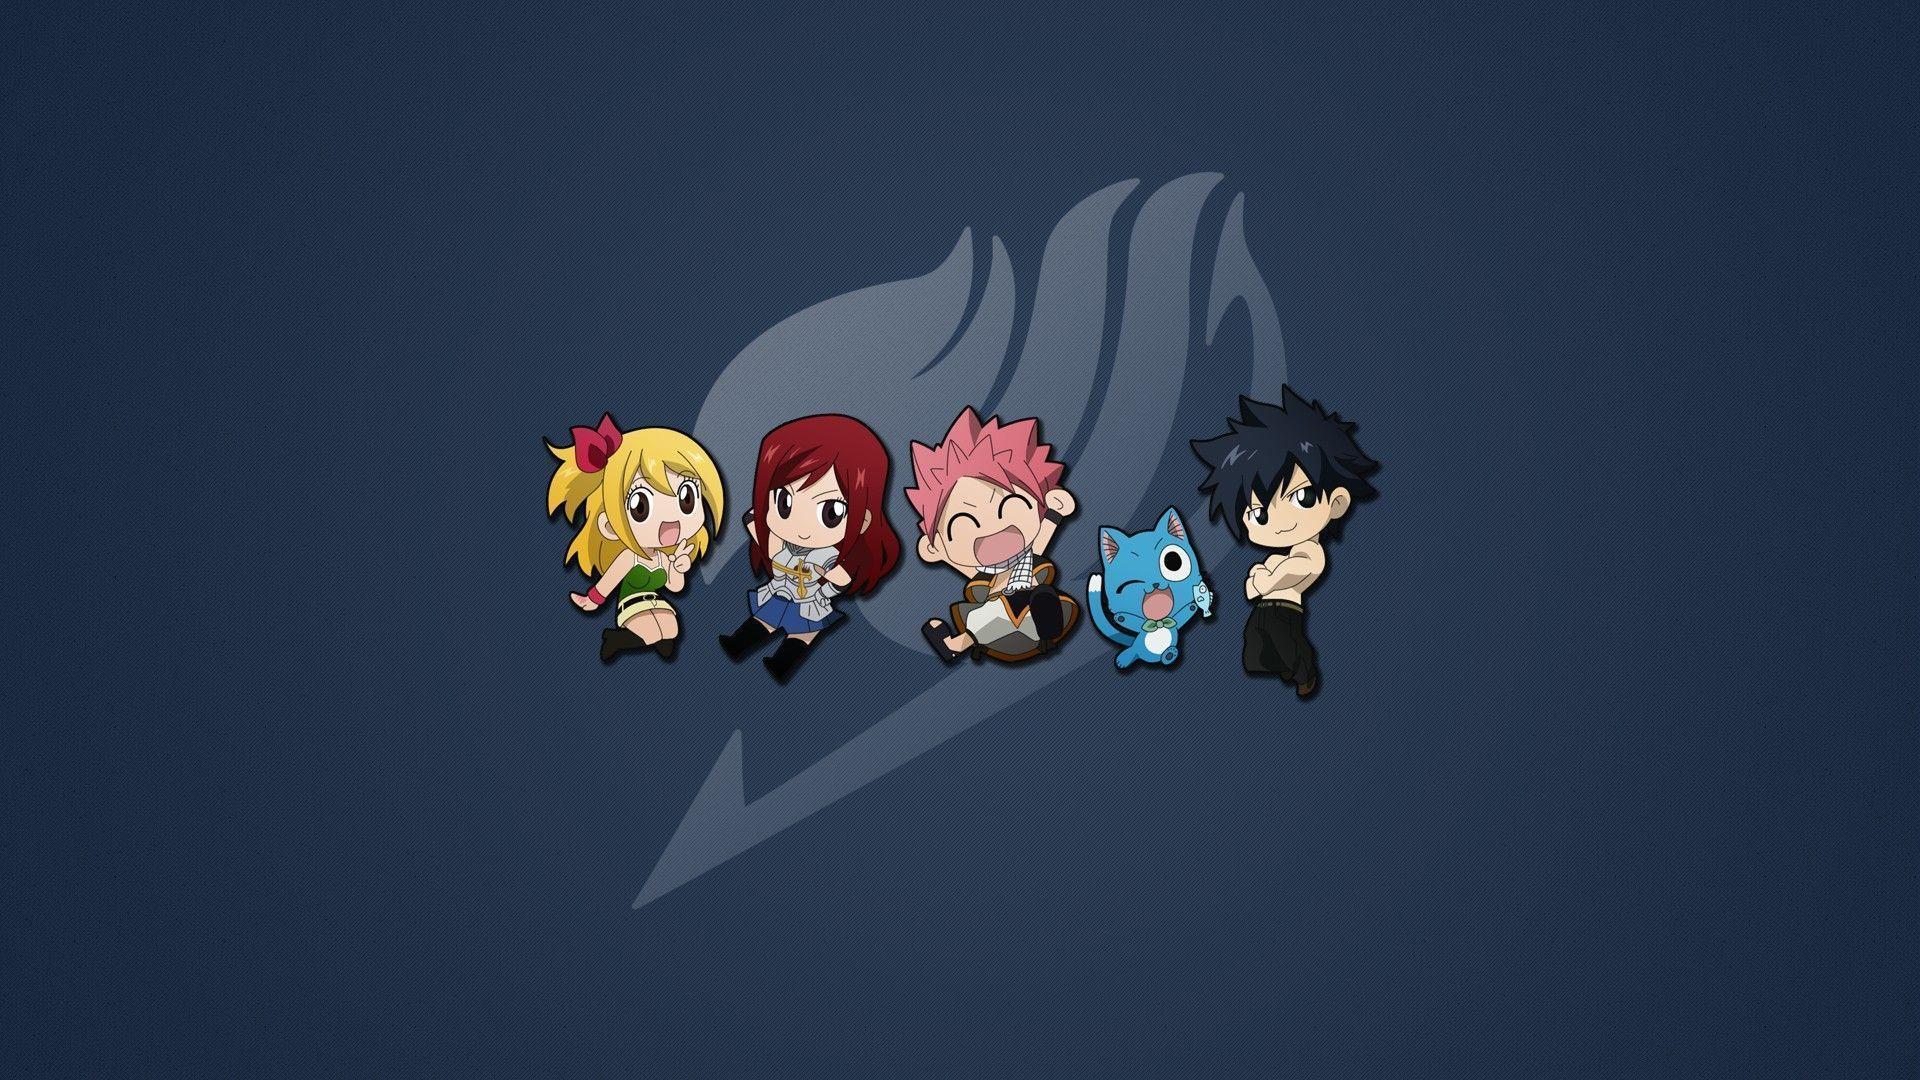 Wallpaper For > Fairy Tail Gray Wallpaper HD 1920x1080